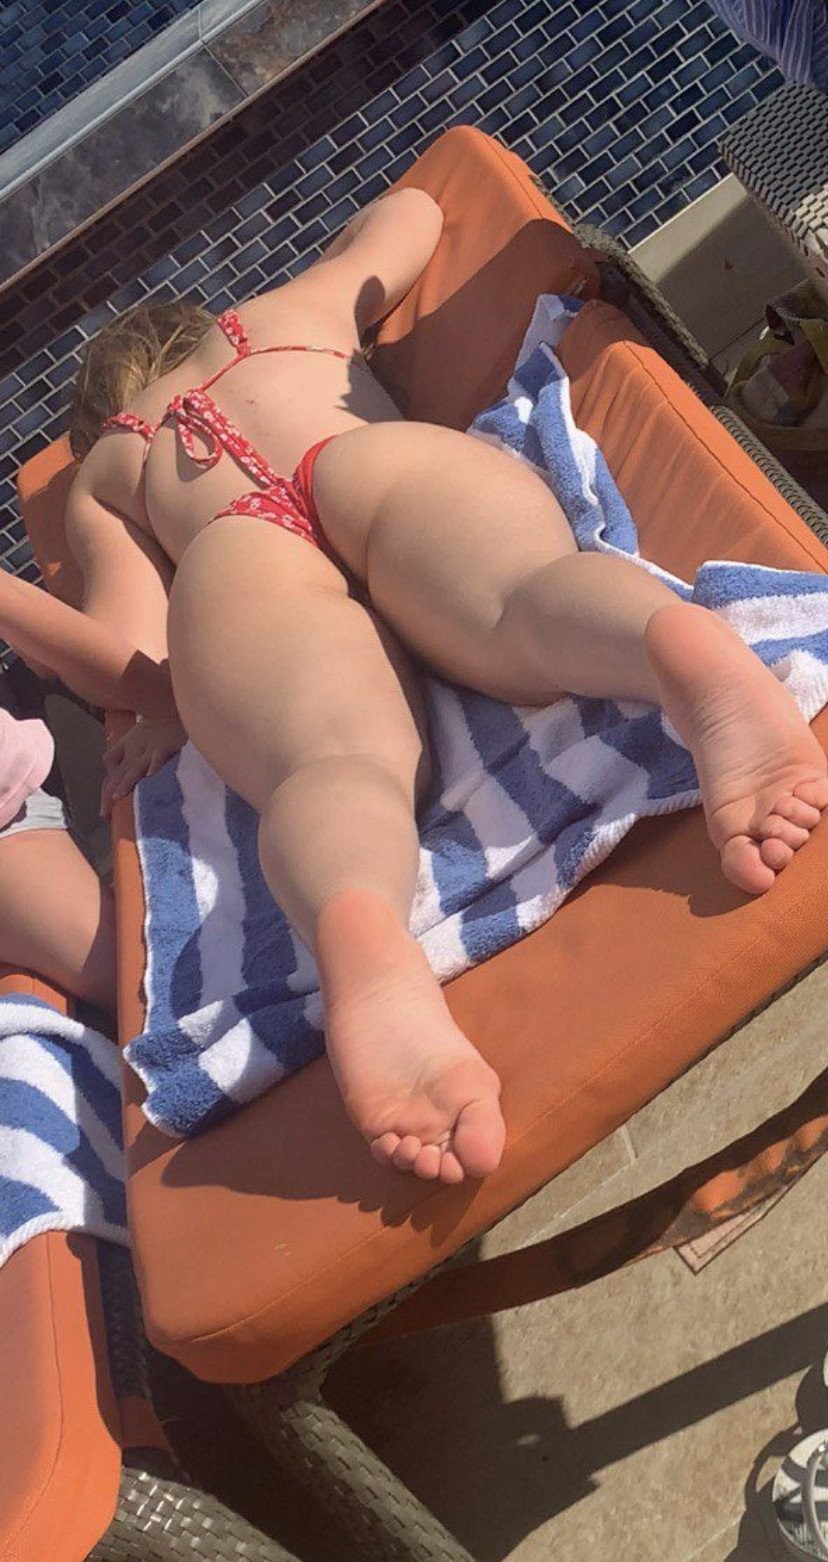 teenager whore candid by the pool demonstrates off ideal butt and feet enough enjoys and ill post face